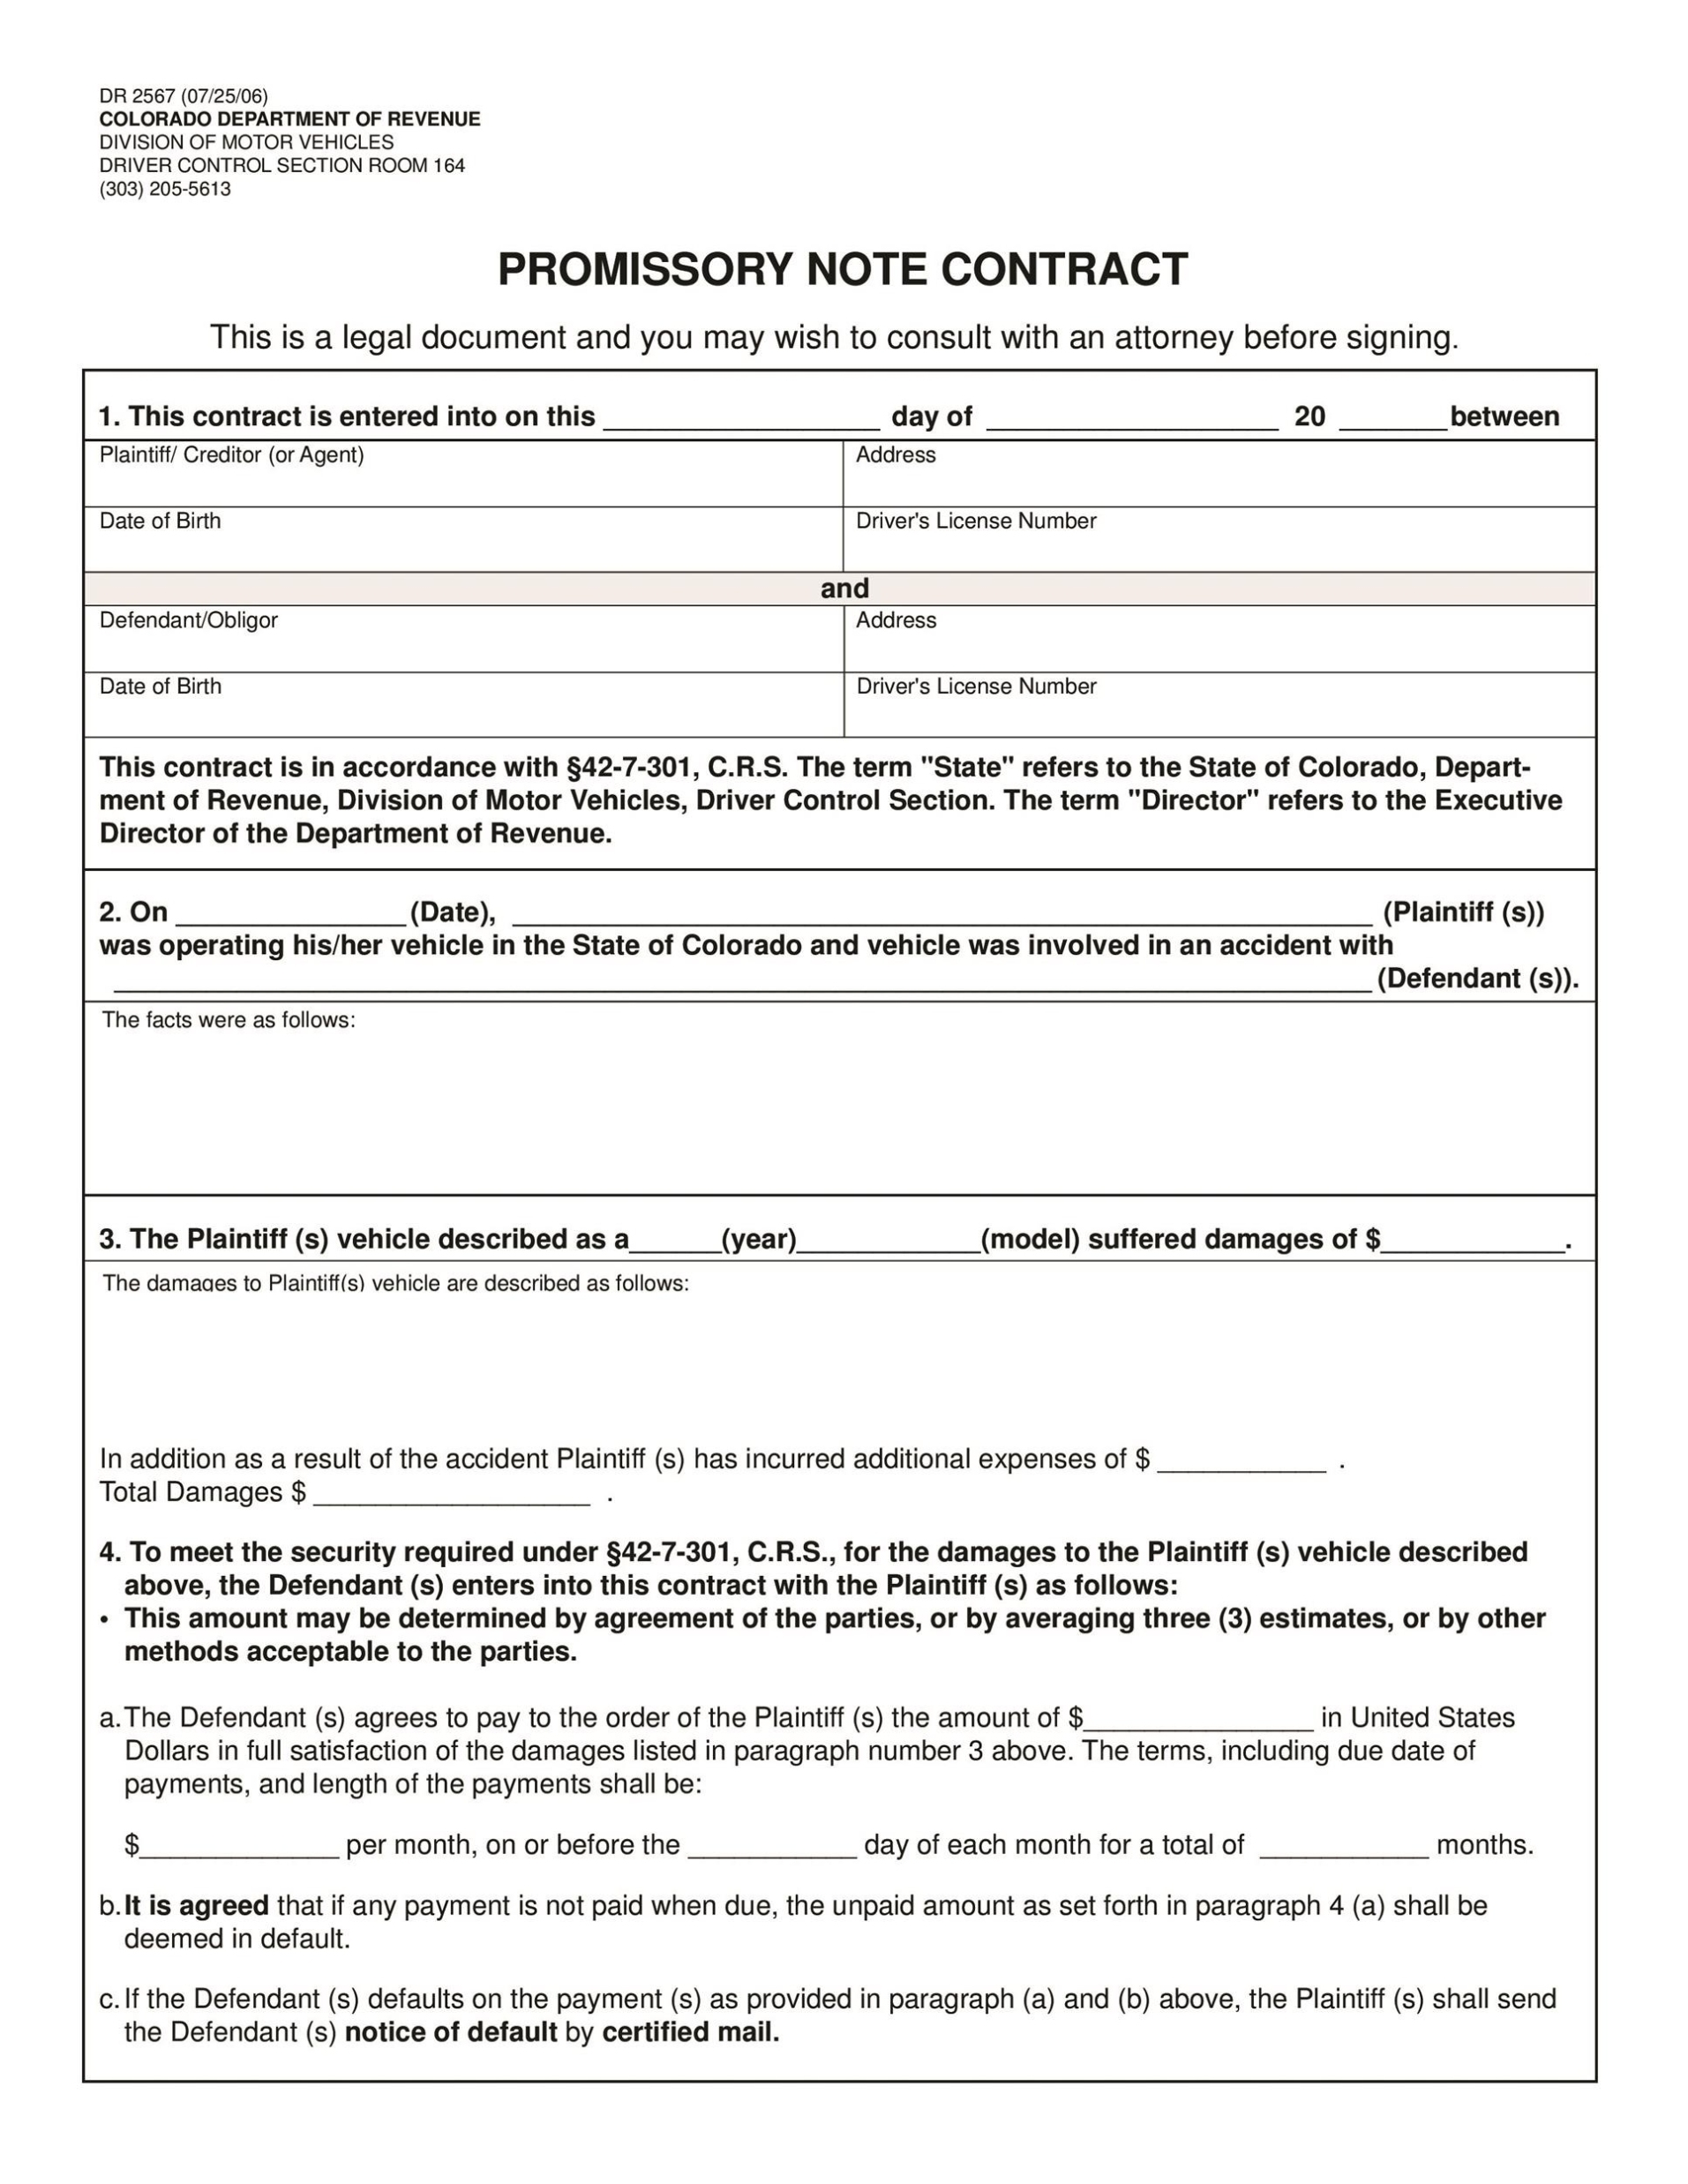 45 Free Promissory Note Templates &amp; Forms [Word &amp; Pdf] - Template Lab intended for Free Installment Promissory Note Template